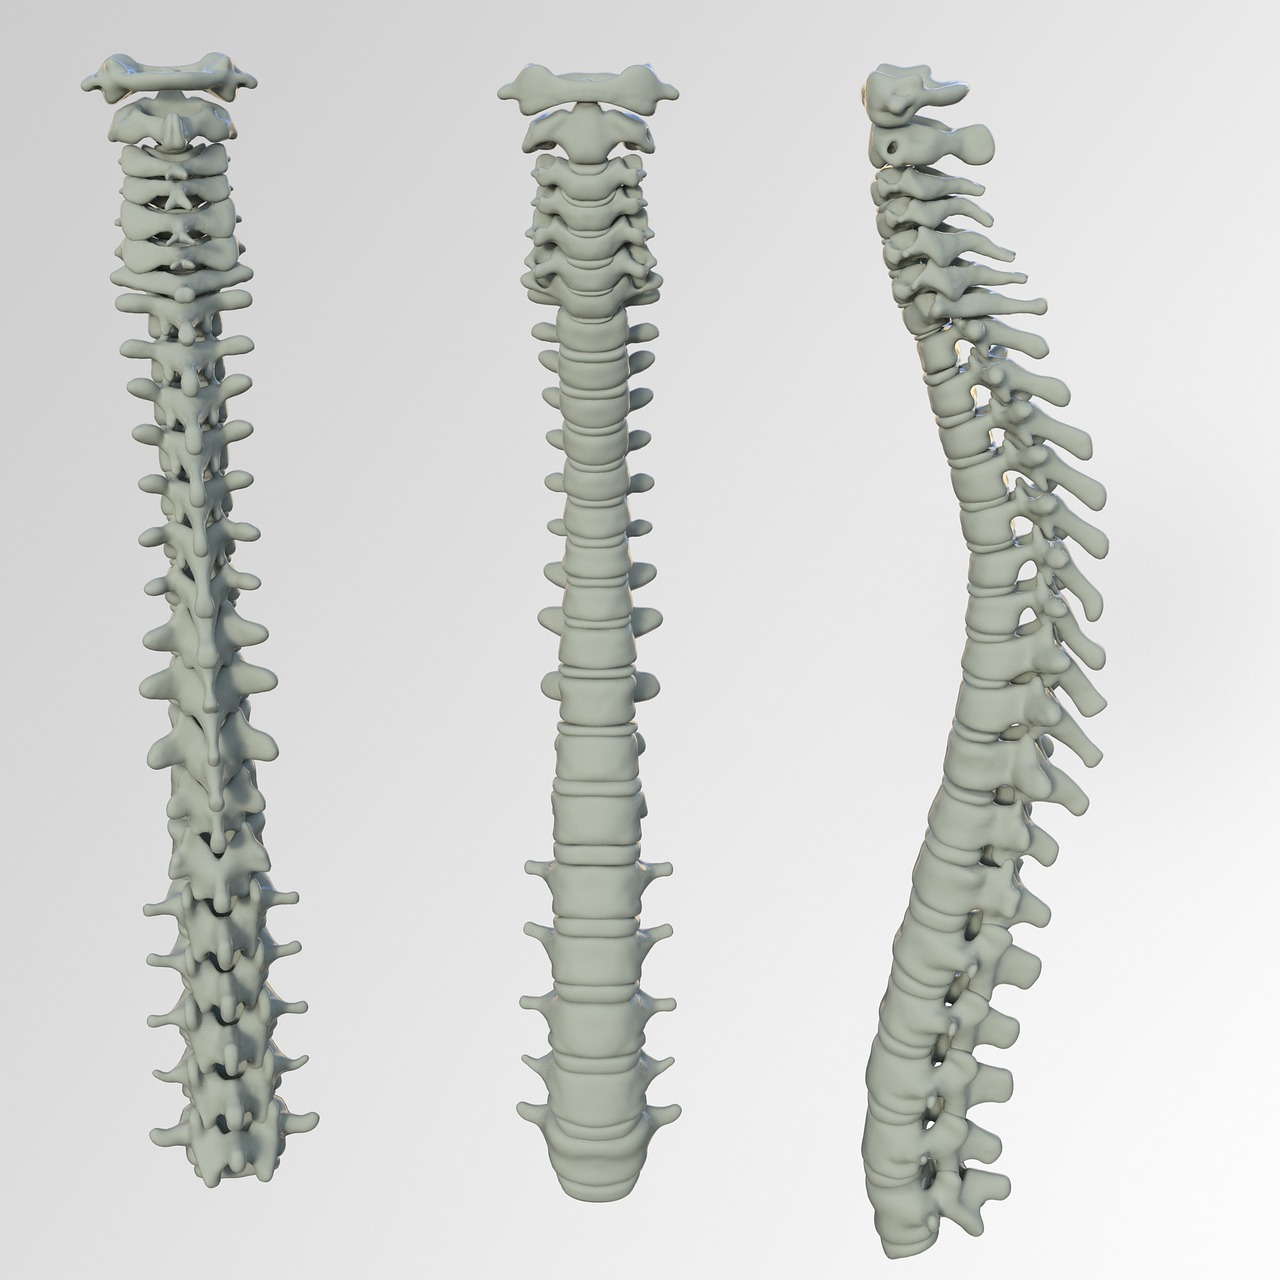 An animation of a spine